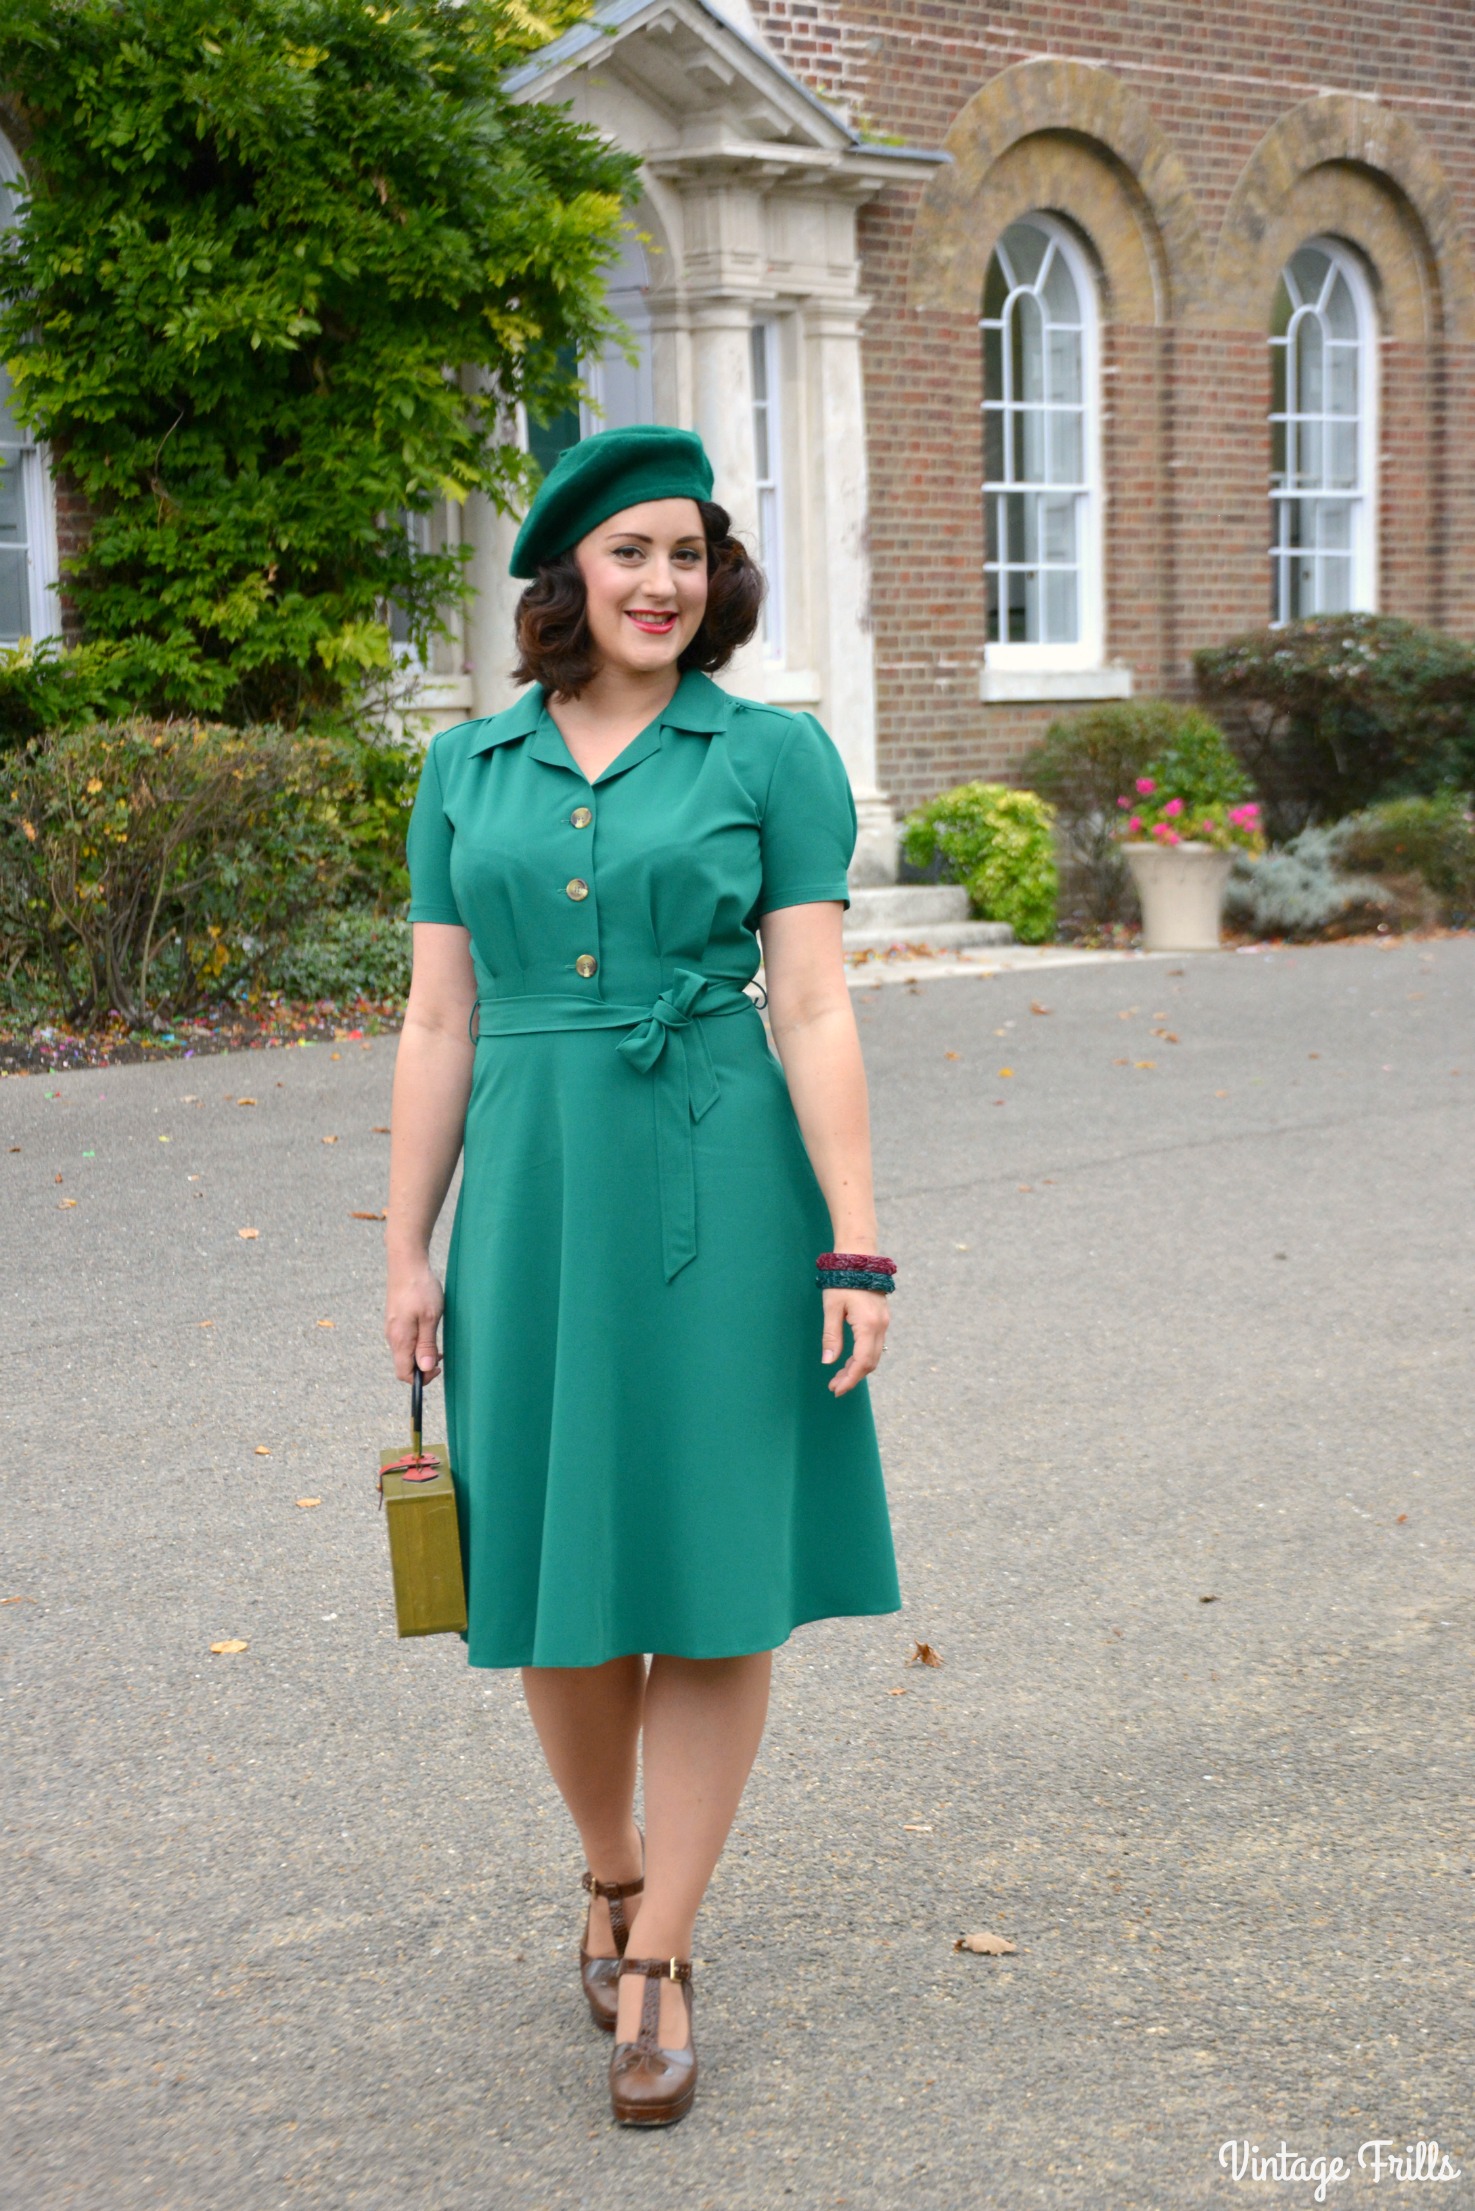 The Perfect 1940s Style Dress From Pretty Retro Ootd Vintage Frills